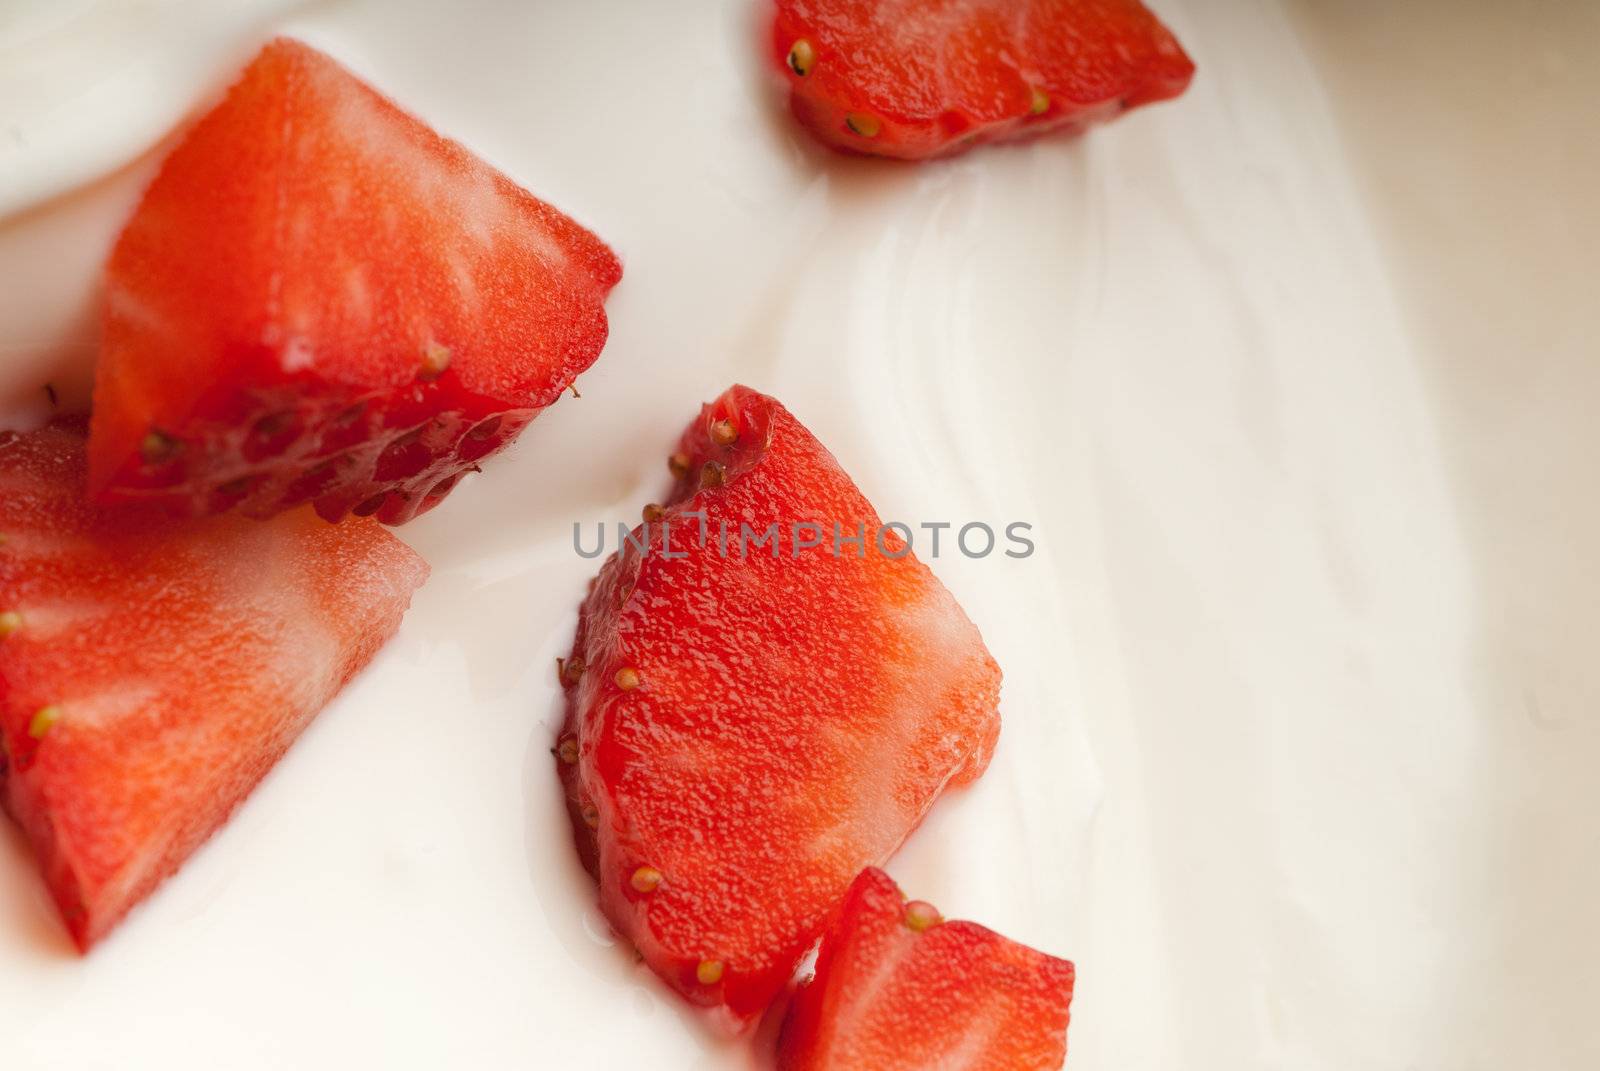 Juicy red strawberry pieces floating in cream